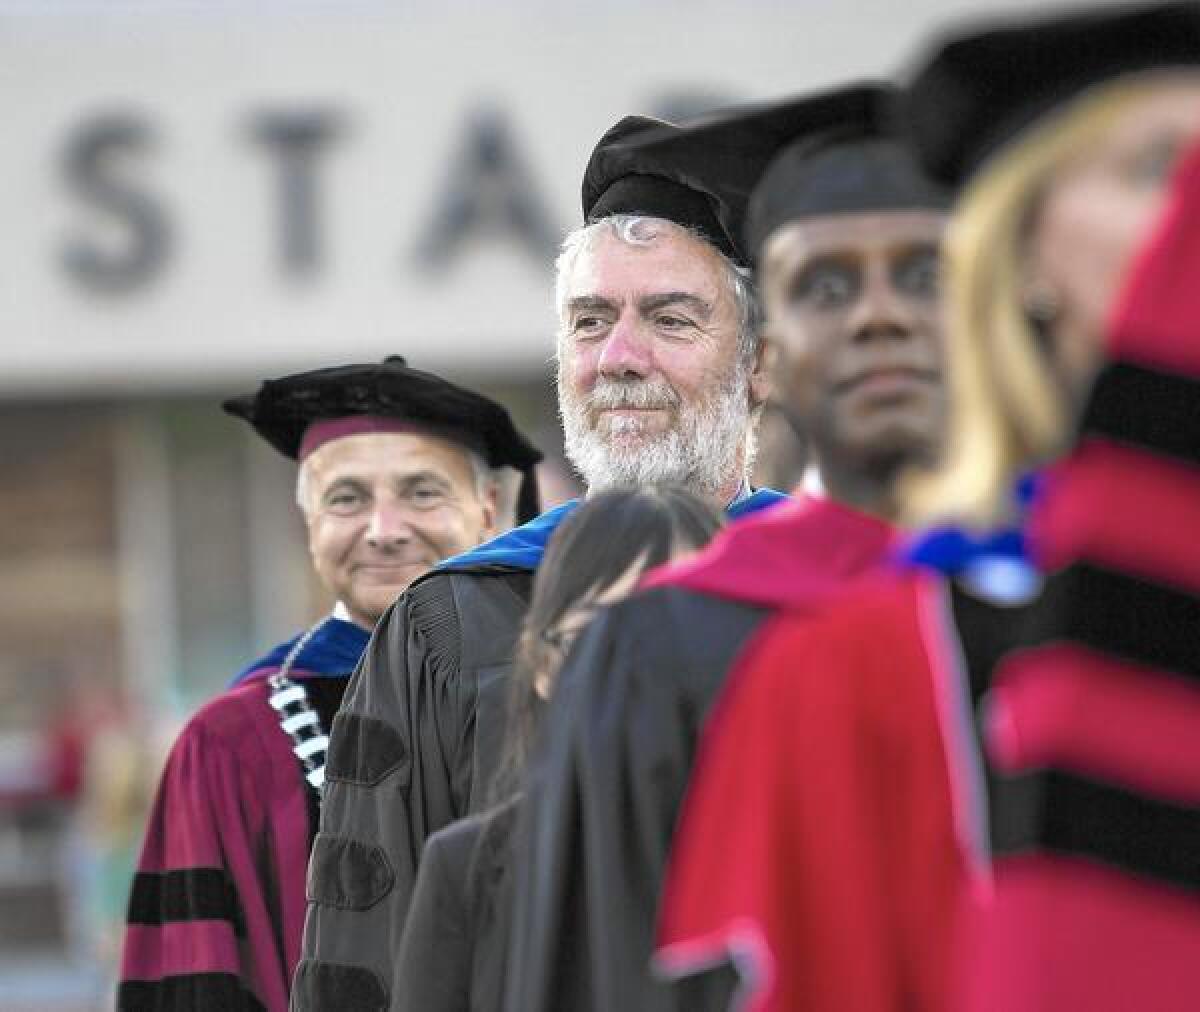 Chapman University’s Opening Convocation on Aug. 23 was the official beginning of the university’s 2016-17 academic year. It also marked President Jim Doti’s final official appearance as leader of the institution as he steps down to return to the Chapman economics faculty on Sept. 1.